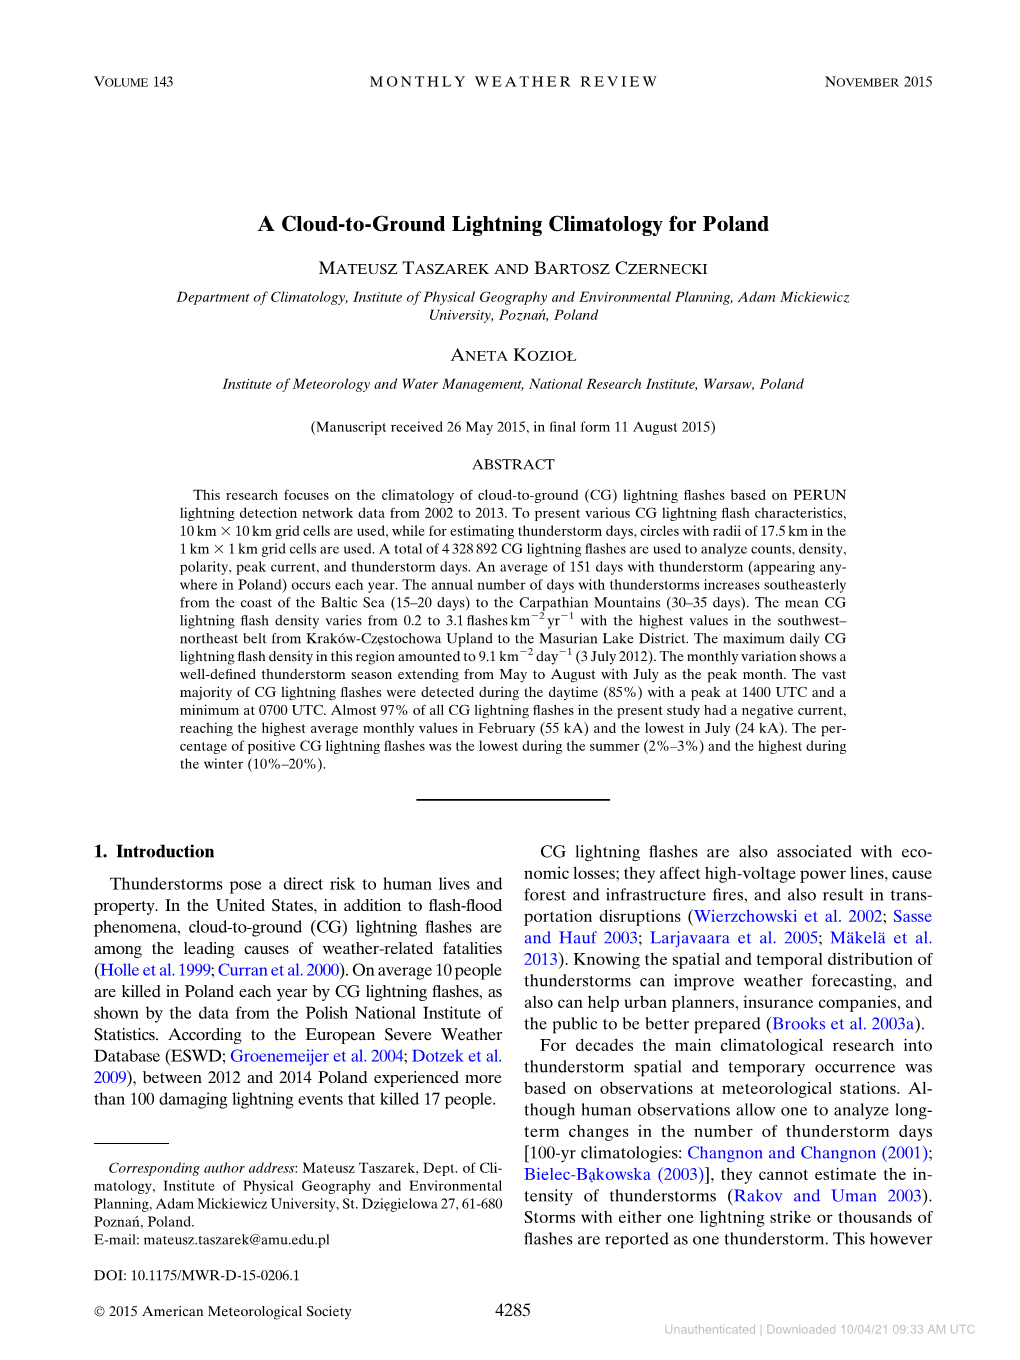 A Cloud-To-Ground Lightning Climatology for Poland